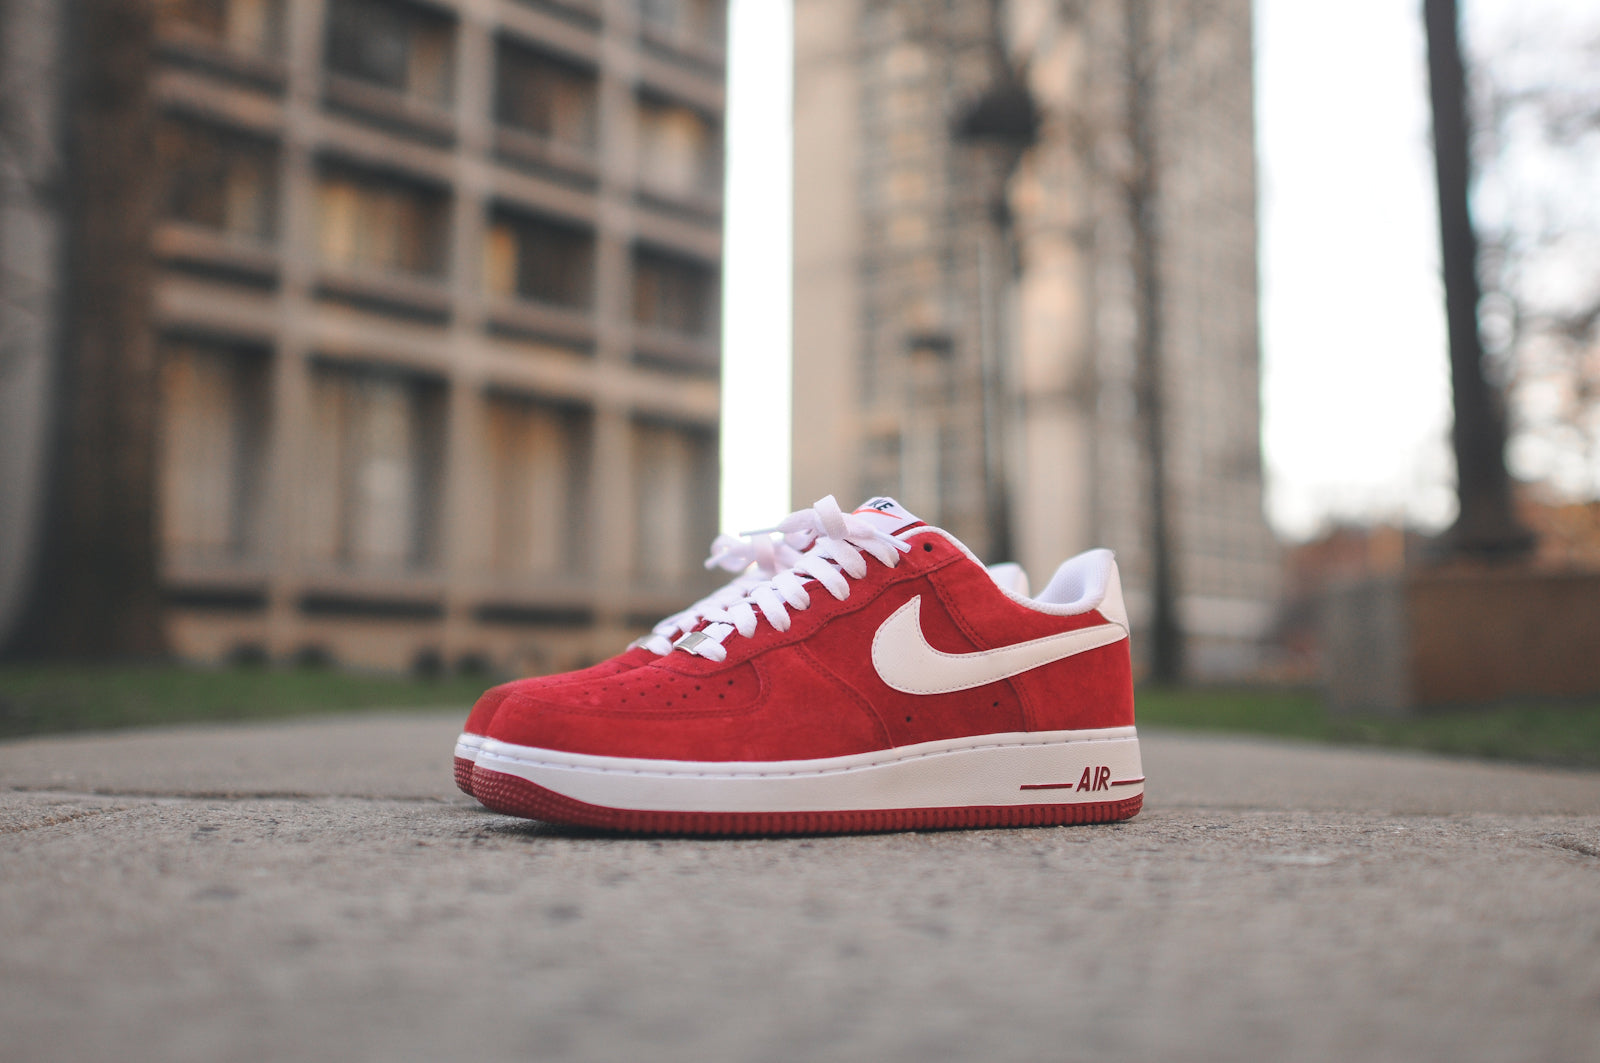 NIKE AIR FORCE 1 LOW - GYM RED / WHITE @ KITH NYC